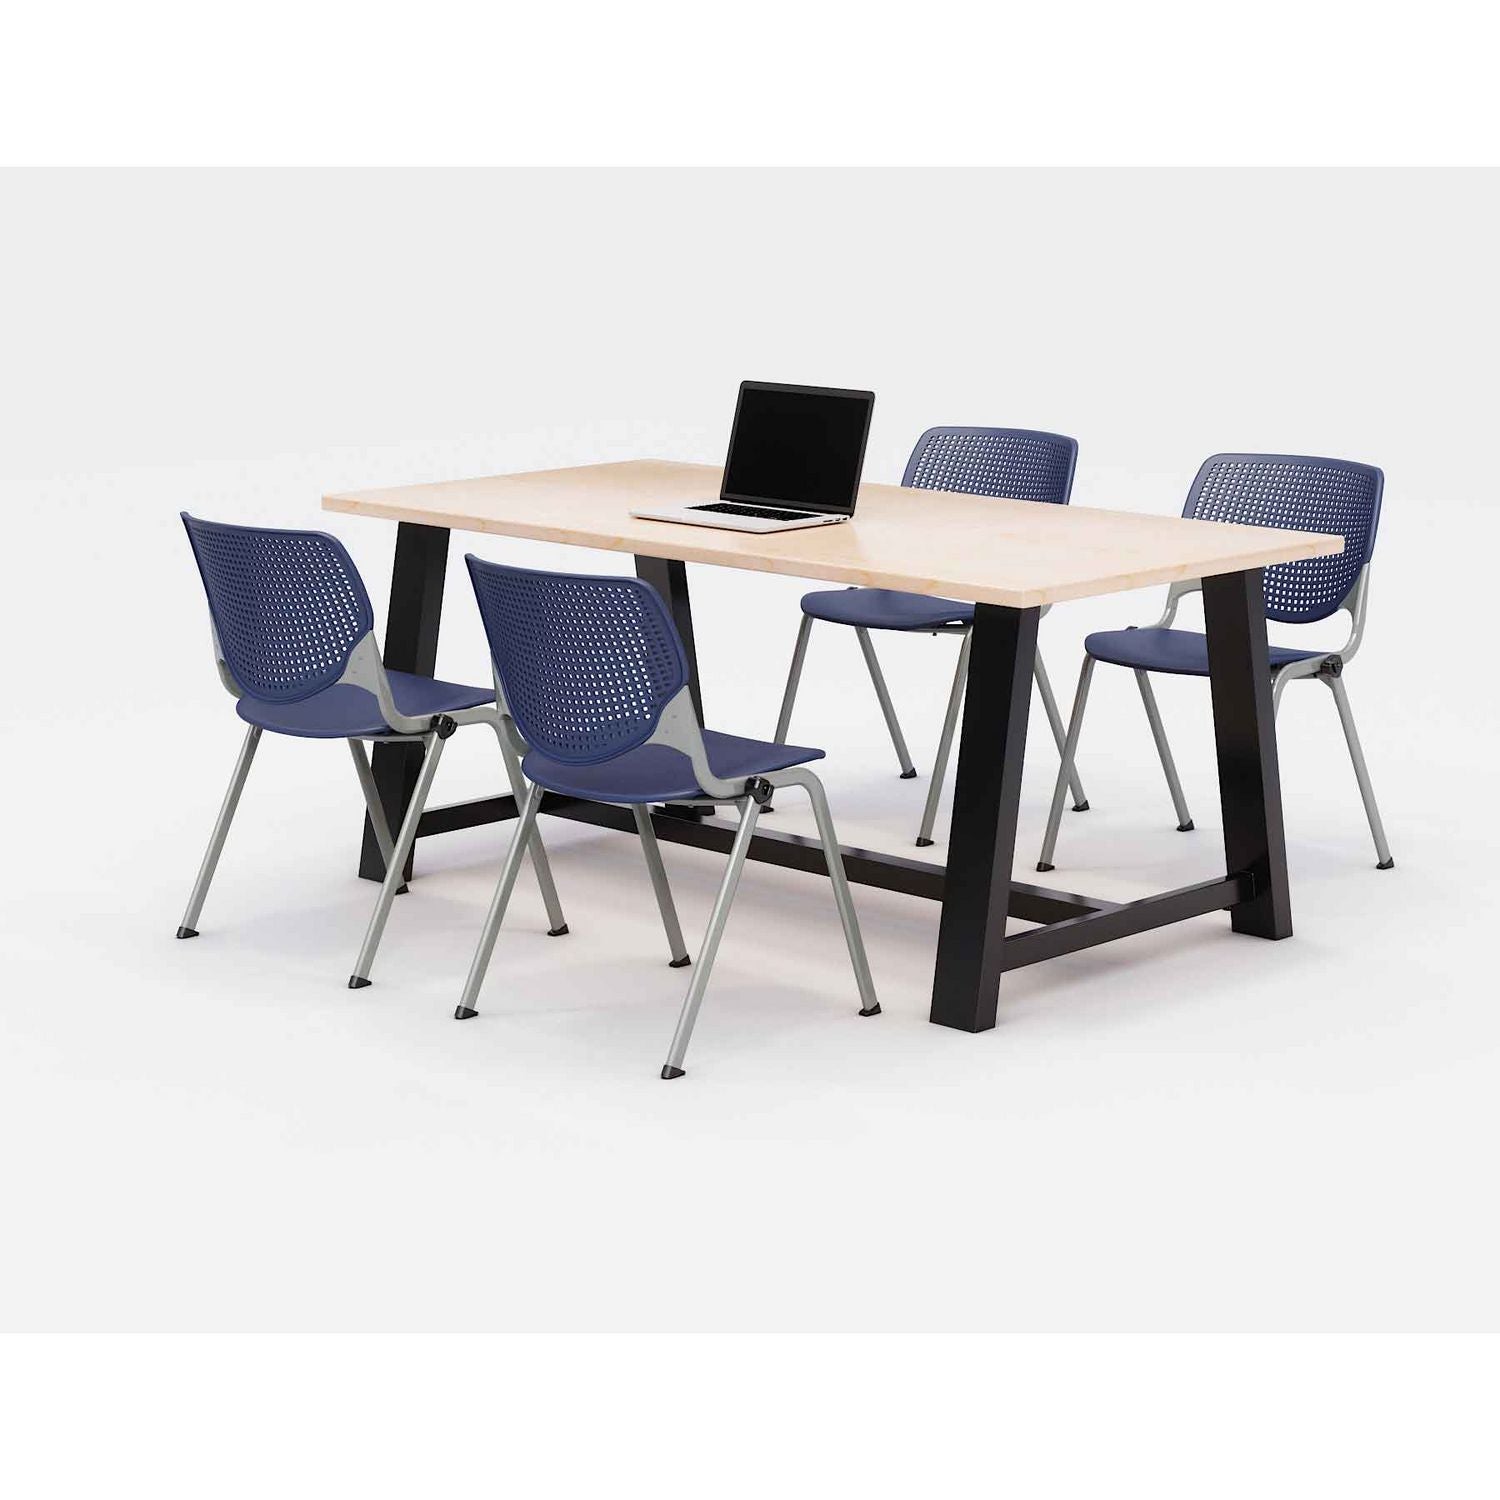 midtown-dining-table-with-four-navy-kool-series-chairs-36-x-72-x-30-kensington-maple-ships-in-4-6-business-days_kfi840031900432 - 1